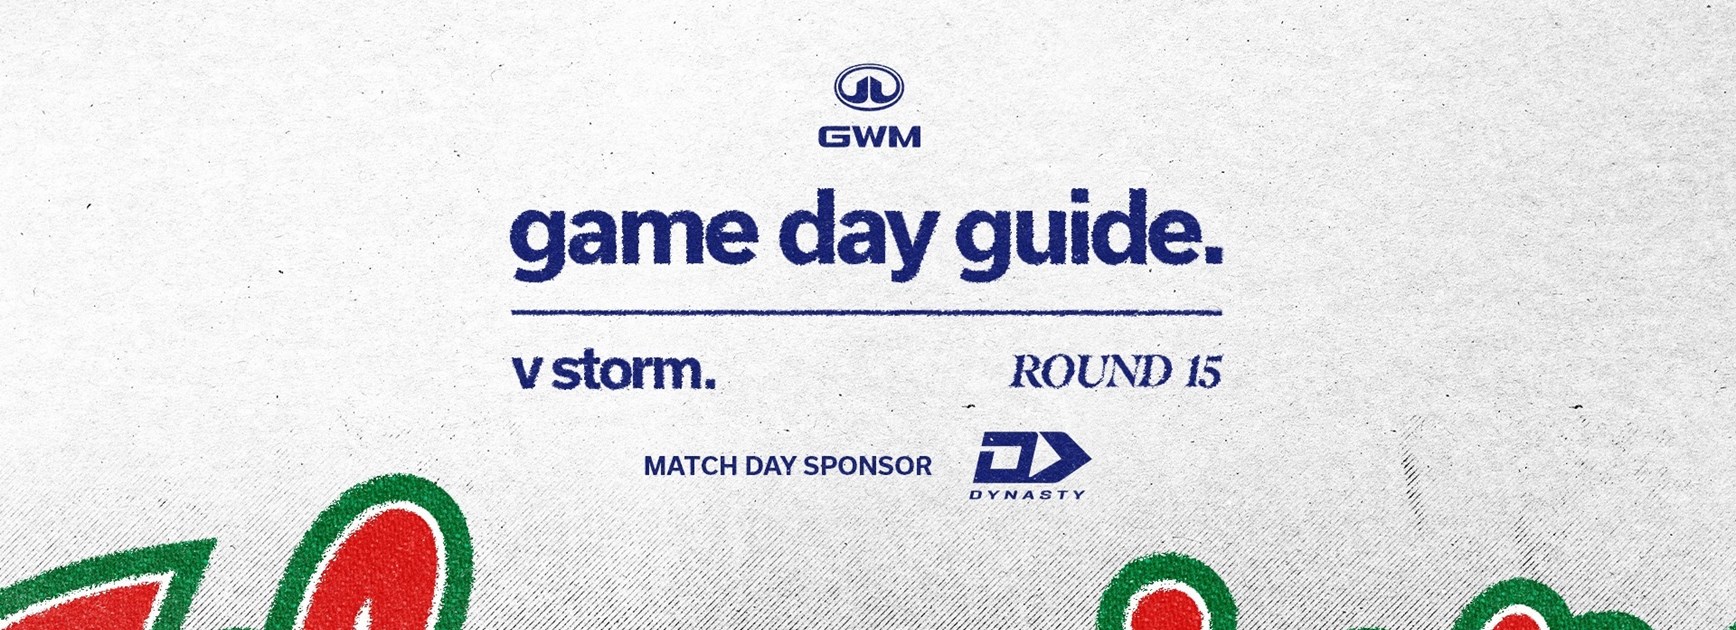 GWM Rd 15 Game Day Guide: Storm warning